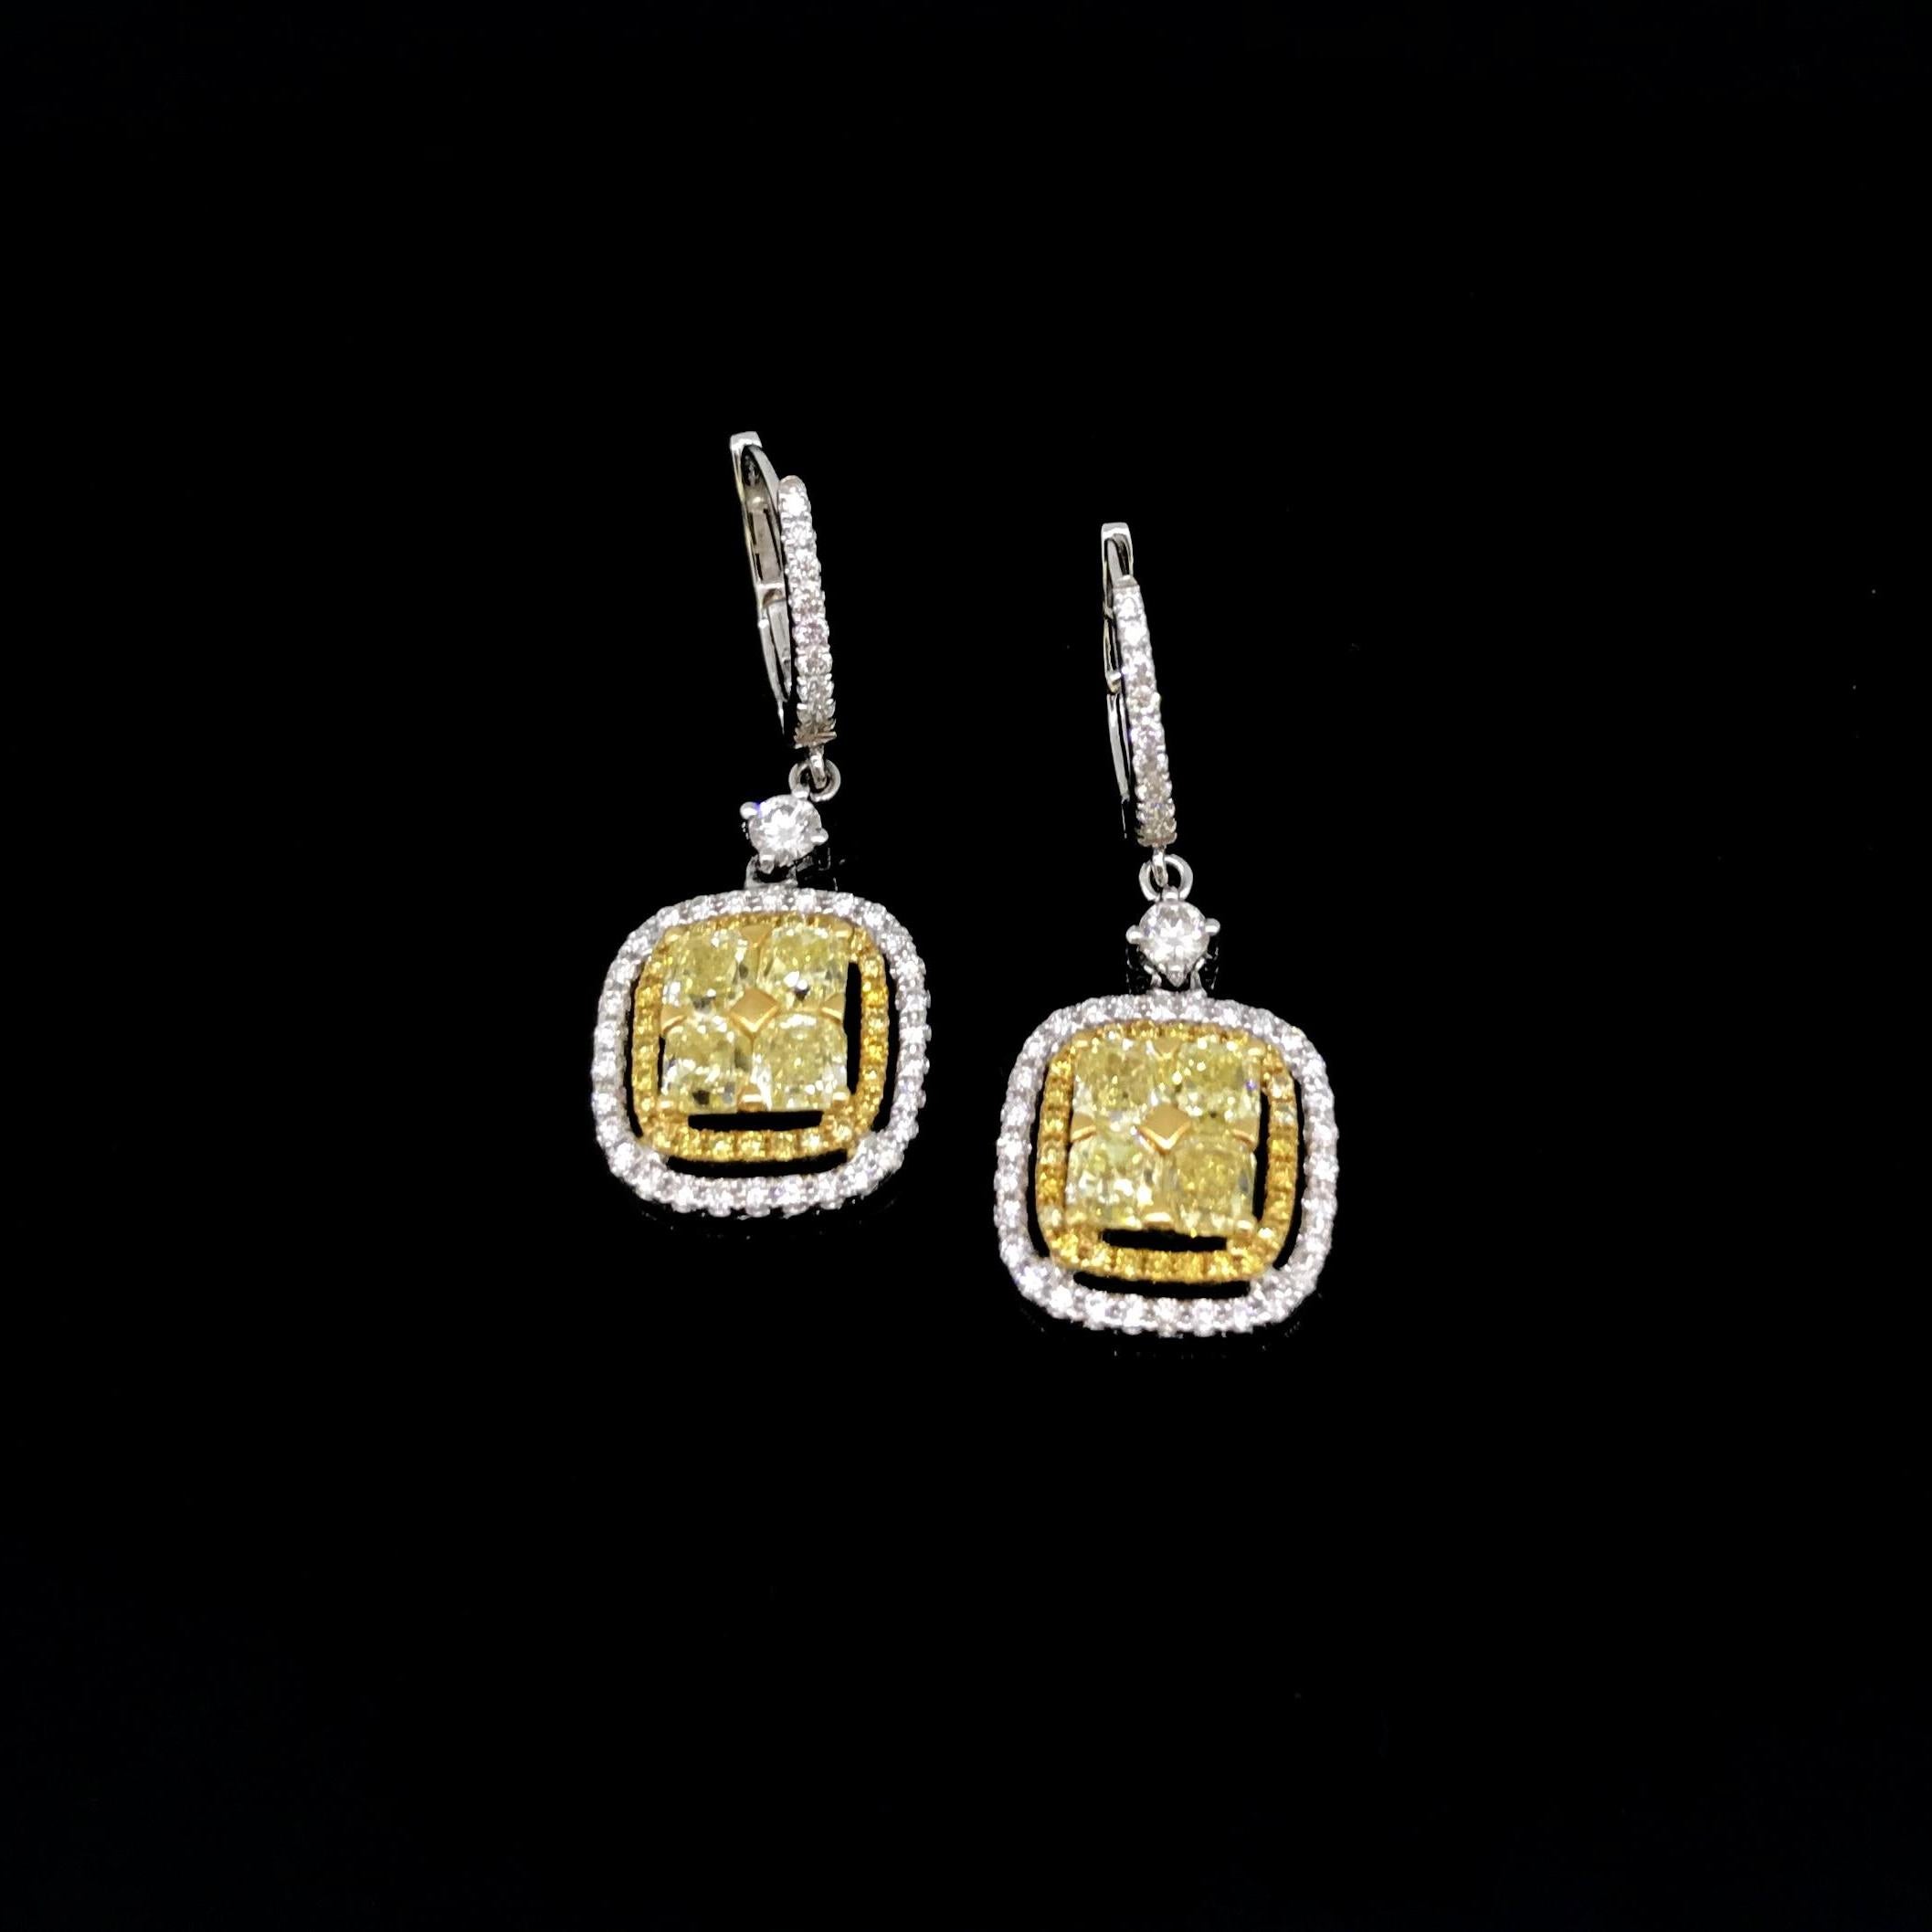 This beautiful pair of earrings is fully made in 18kt white gold. Each earring is set with 4 square cushion yellow diamonds. These are clustered with round brilliant cut fancy yellow diamonds and finally with a final surrounding of white diamonds.